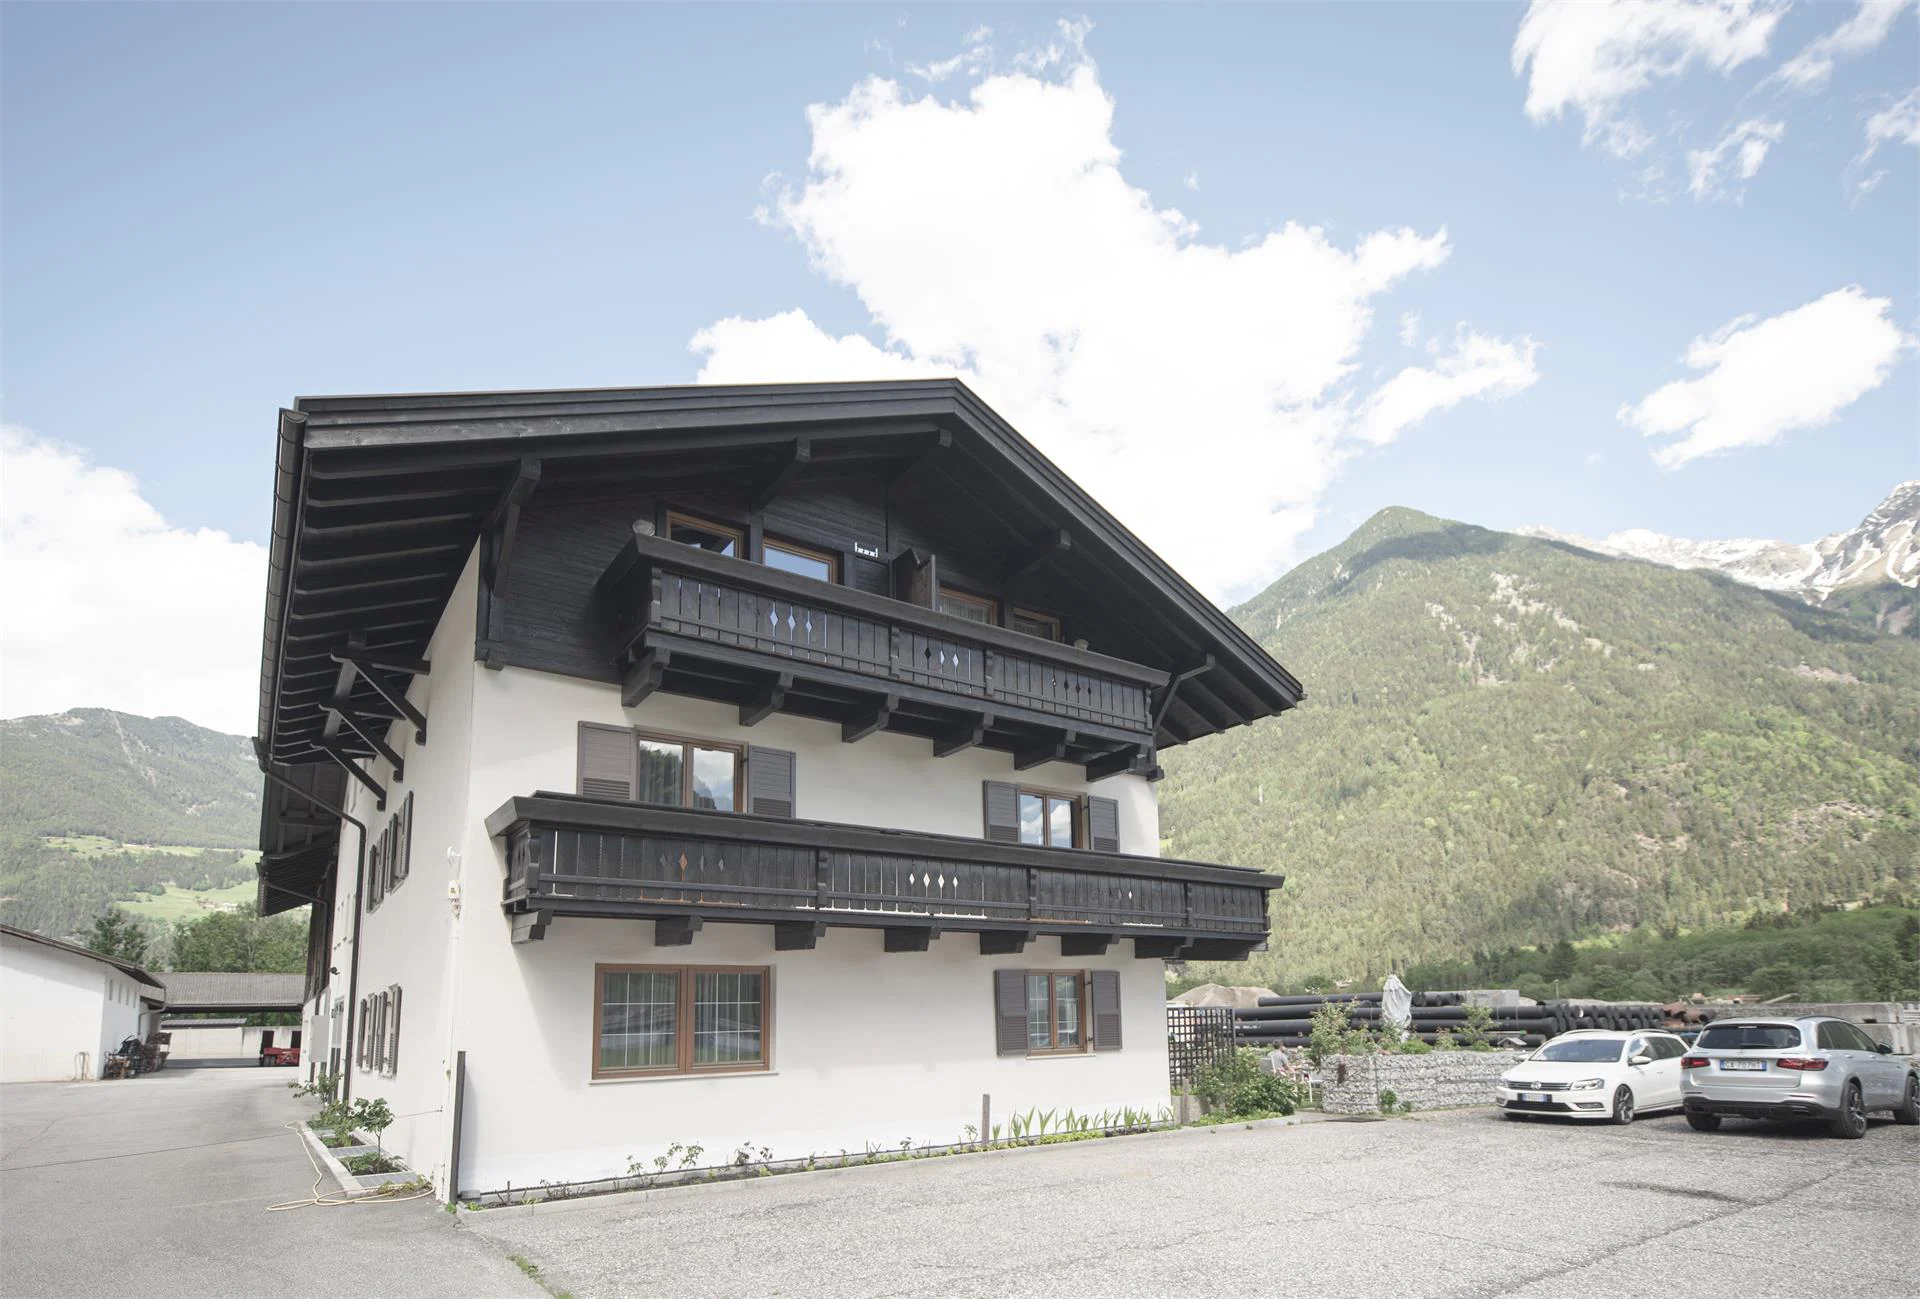 Apartment Village Charme Sand in Taufers/Campo Tures 2 suedtirol.info